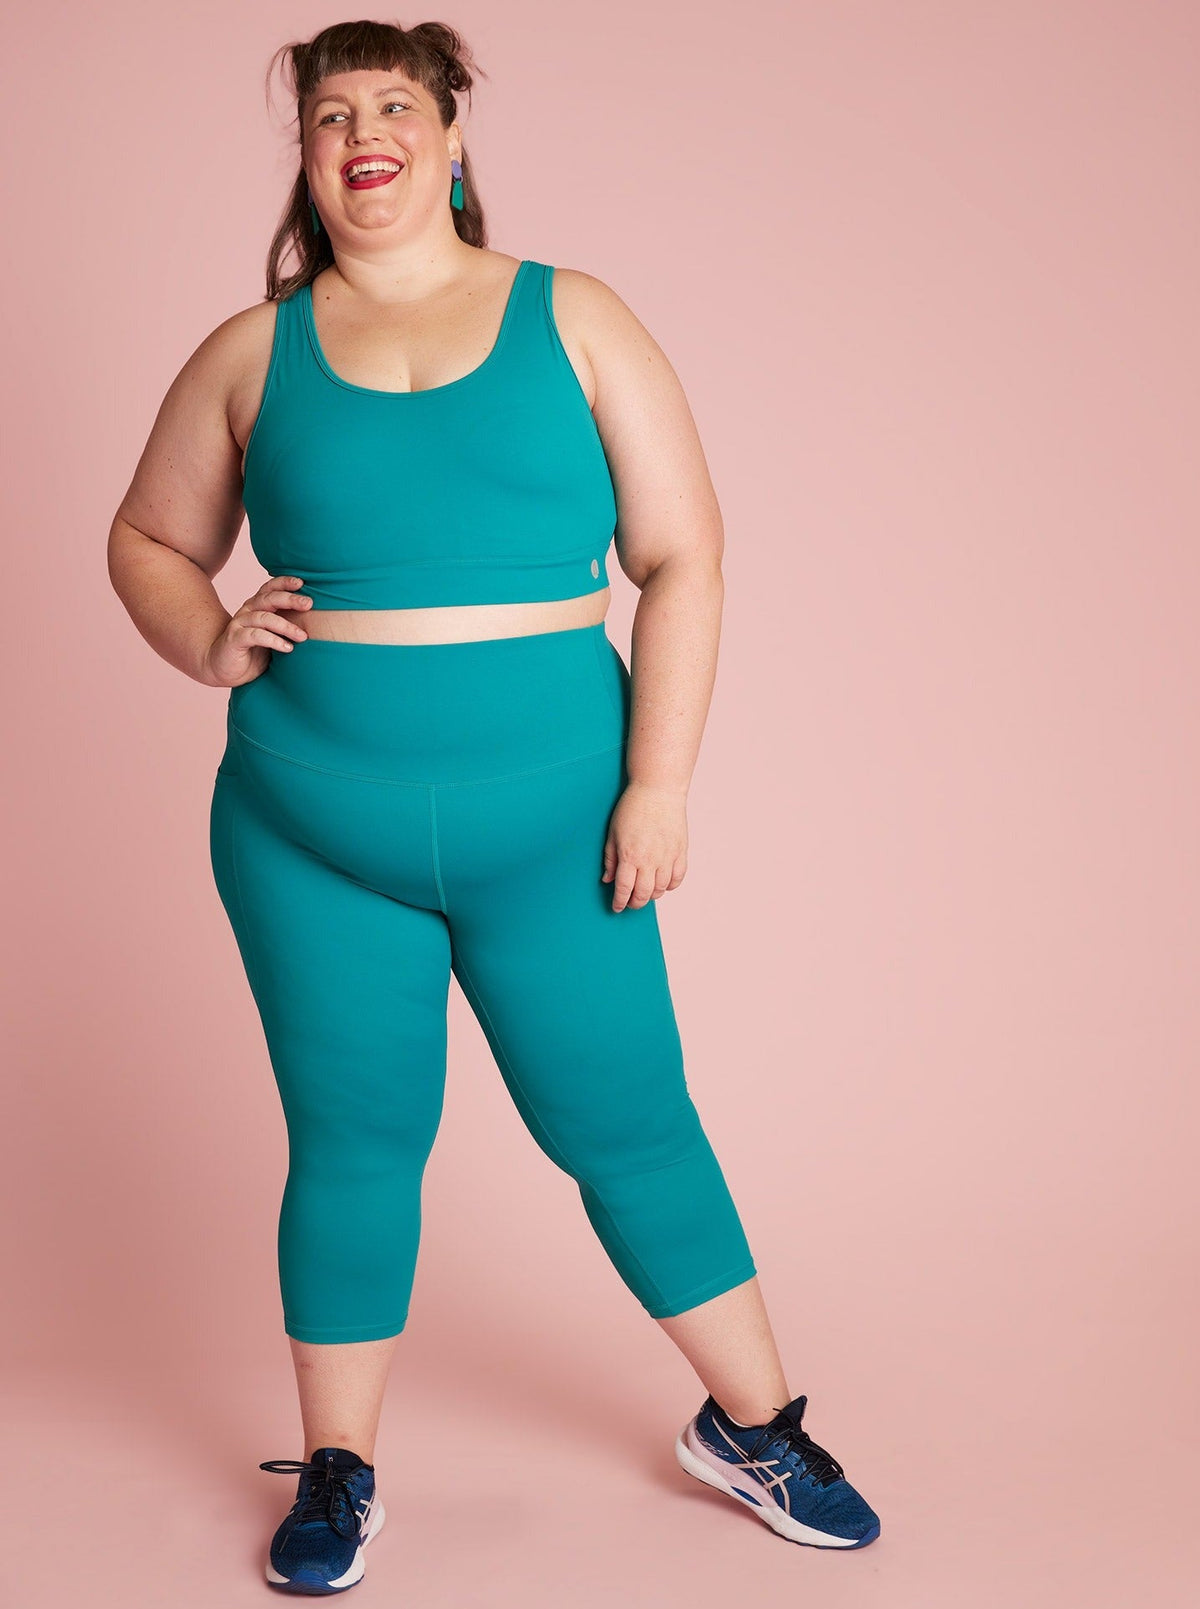 Forest Green Everyday Cropped Legging - 3/4 length - colourful cropped leggings with pockets